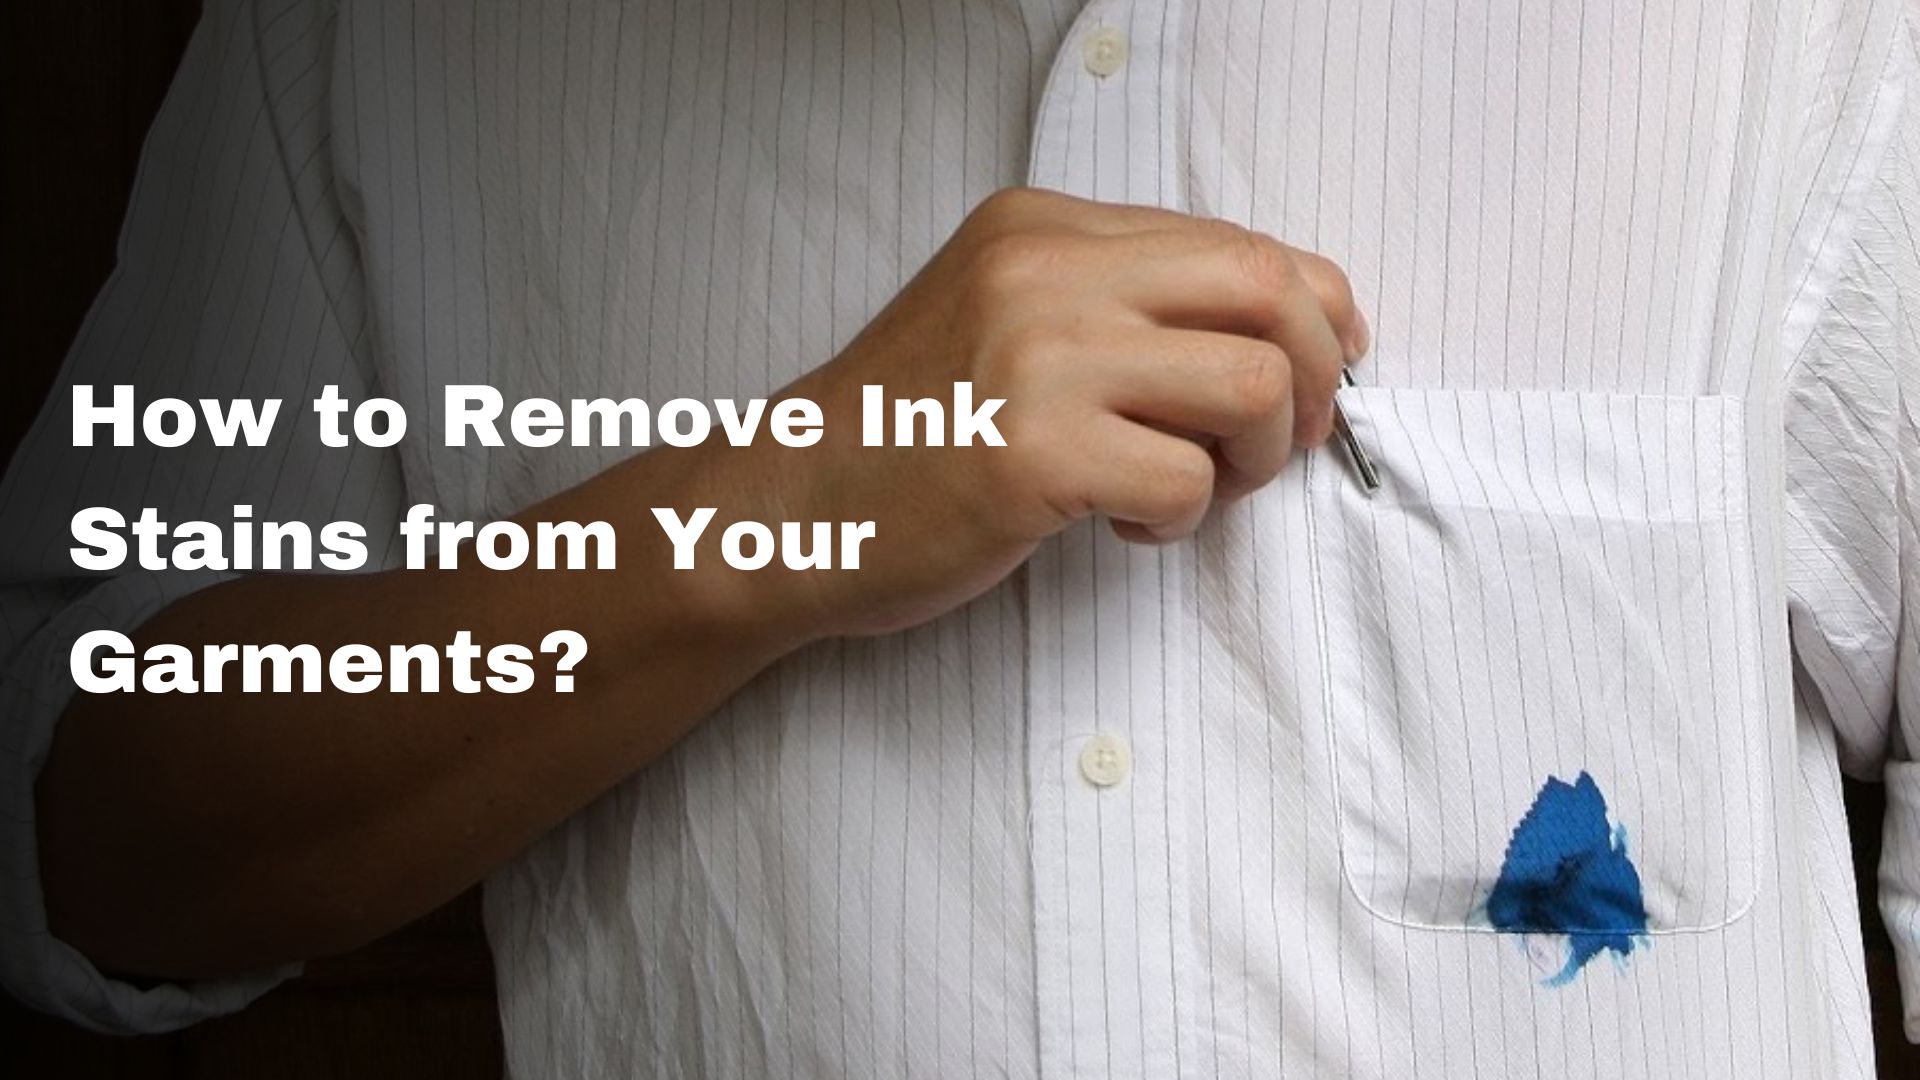 How to Remove Ink Stains from Your Garments?